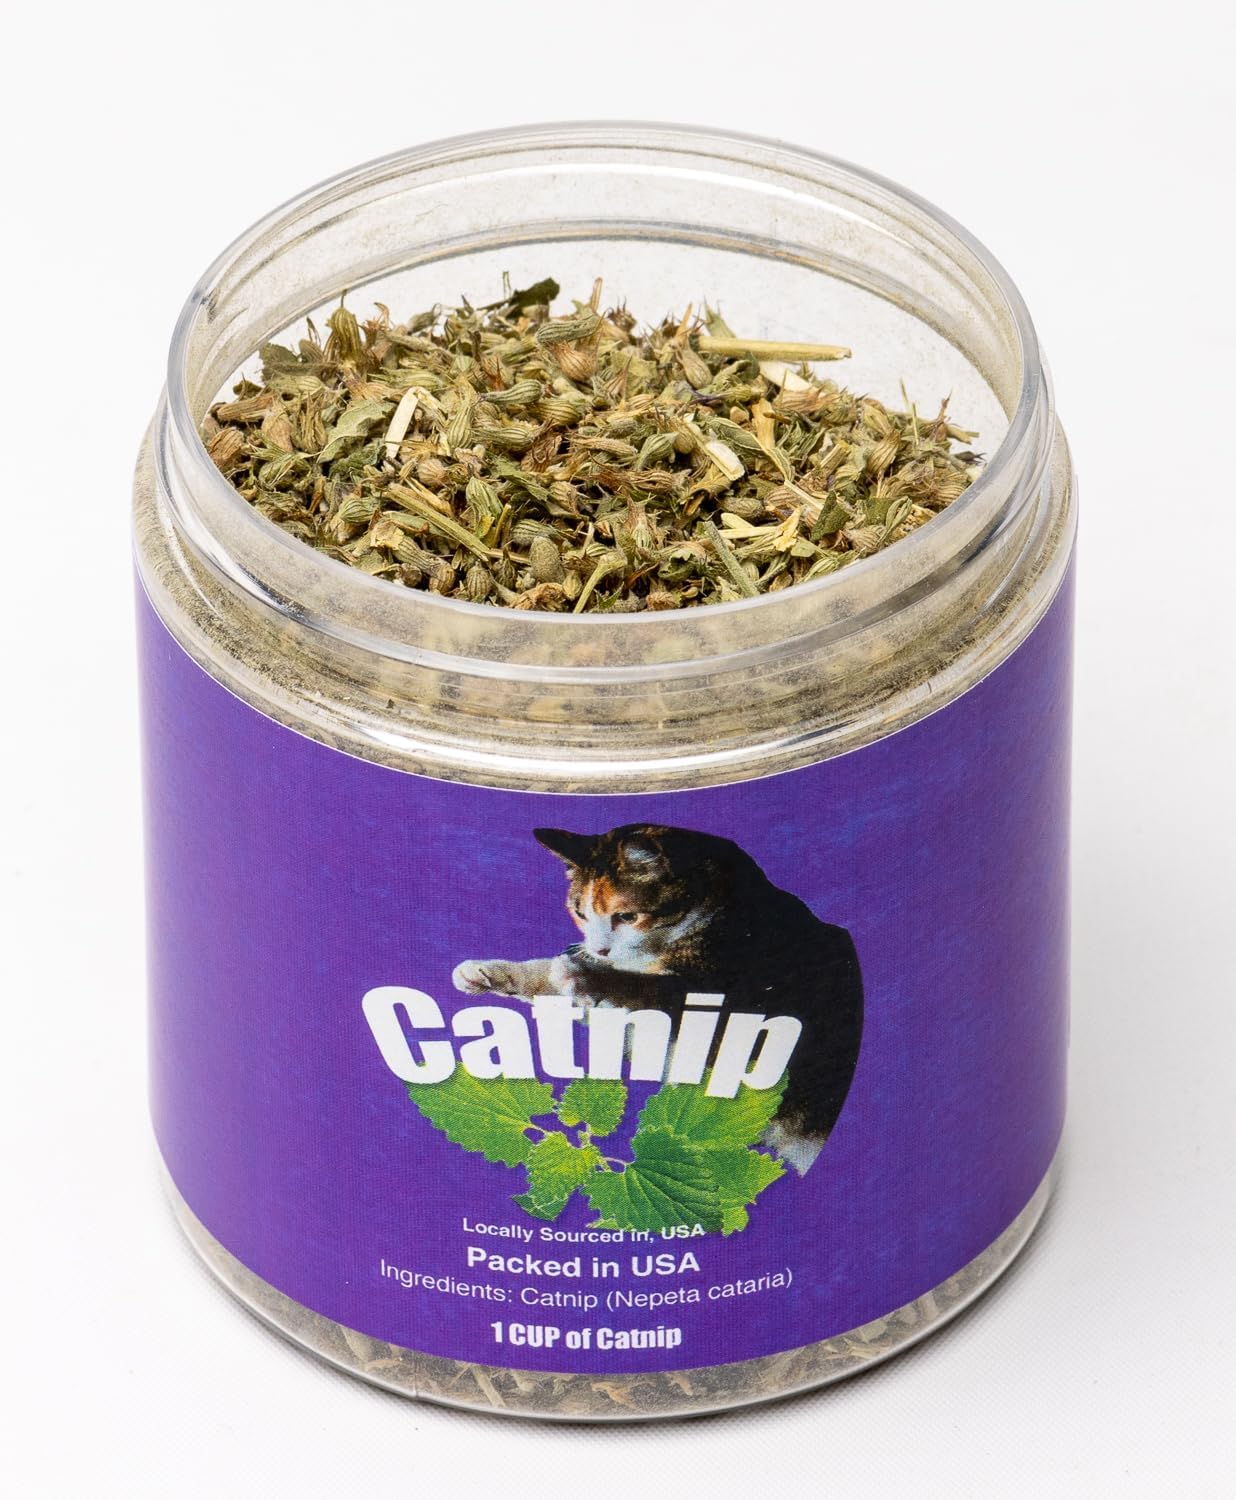 DesertUSA Catnip Blend - North American Crafted, 100% Natural, and Non-Addictive Catnip Treats for Enhanced Playfulness. Ideal for Complementing Catnip Toys, Catnip Spray, and Cat Accessories (1 Cup)